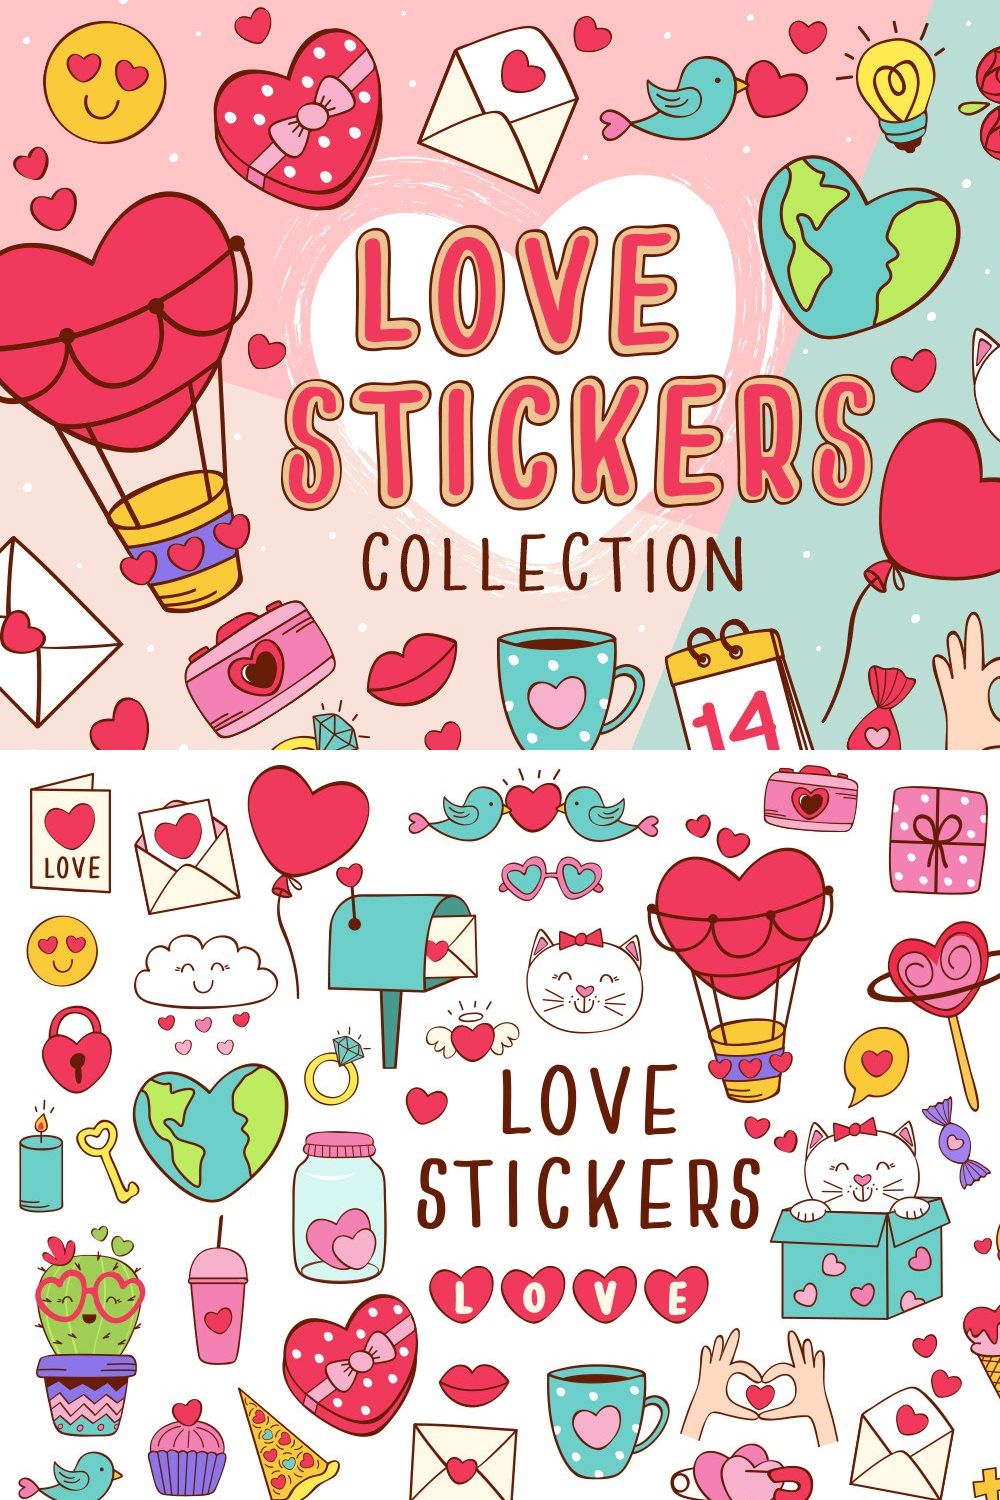 love stickers collection pinterest preview image.